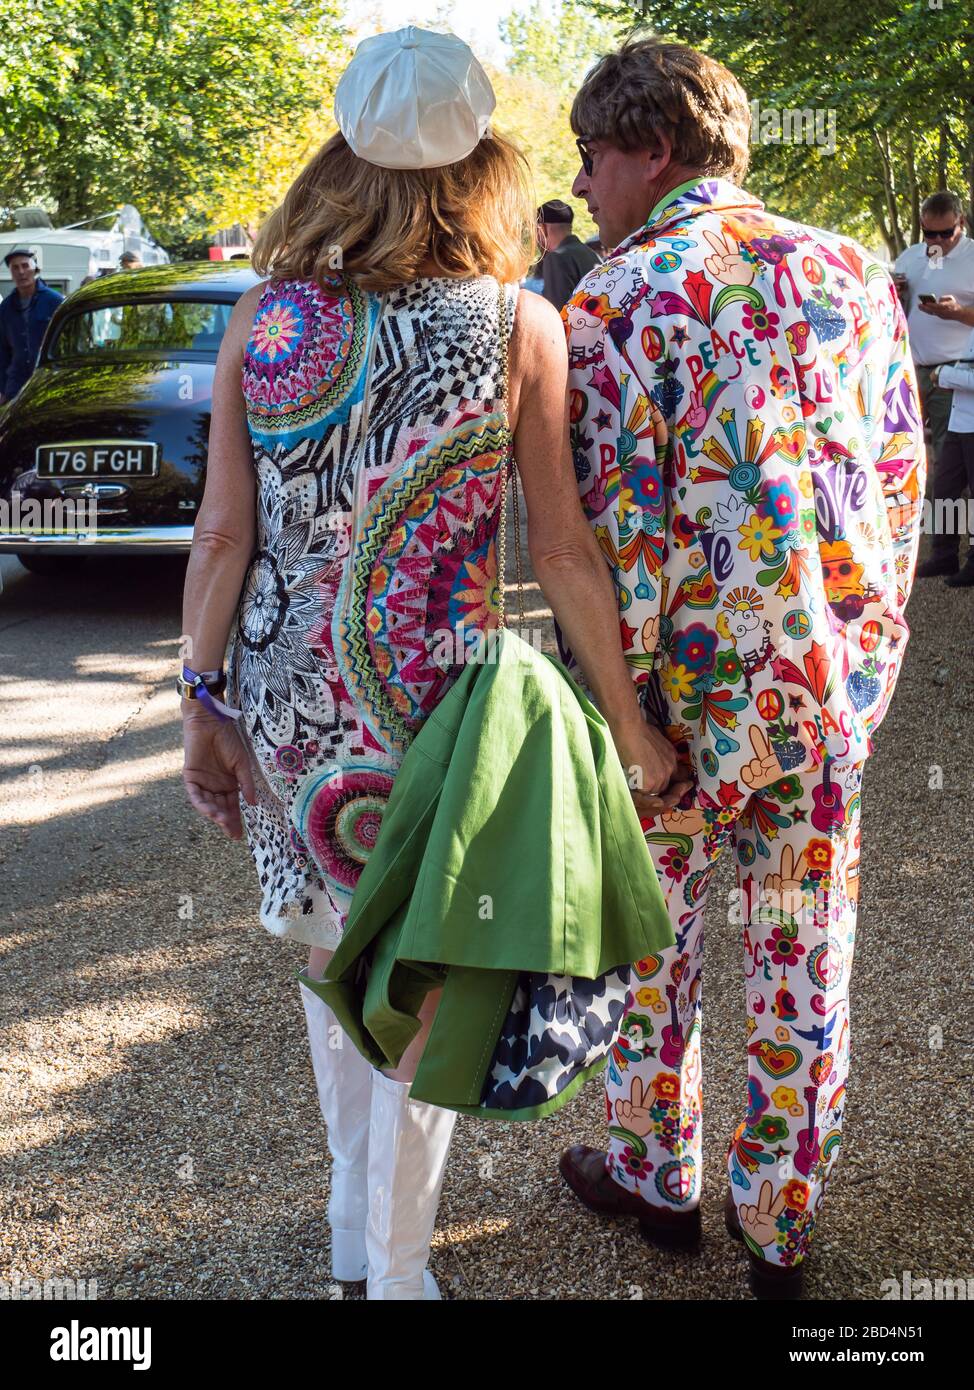 A Man & Woman in Swinging Sixties ensembles, Goodwood Revival 2019 West Sussex UK Banque D'Images